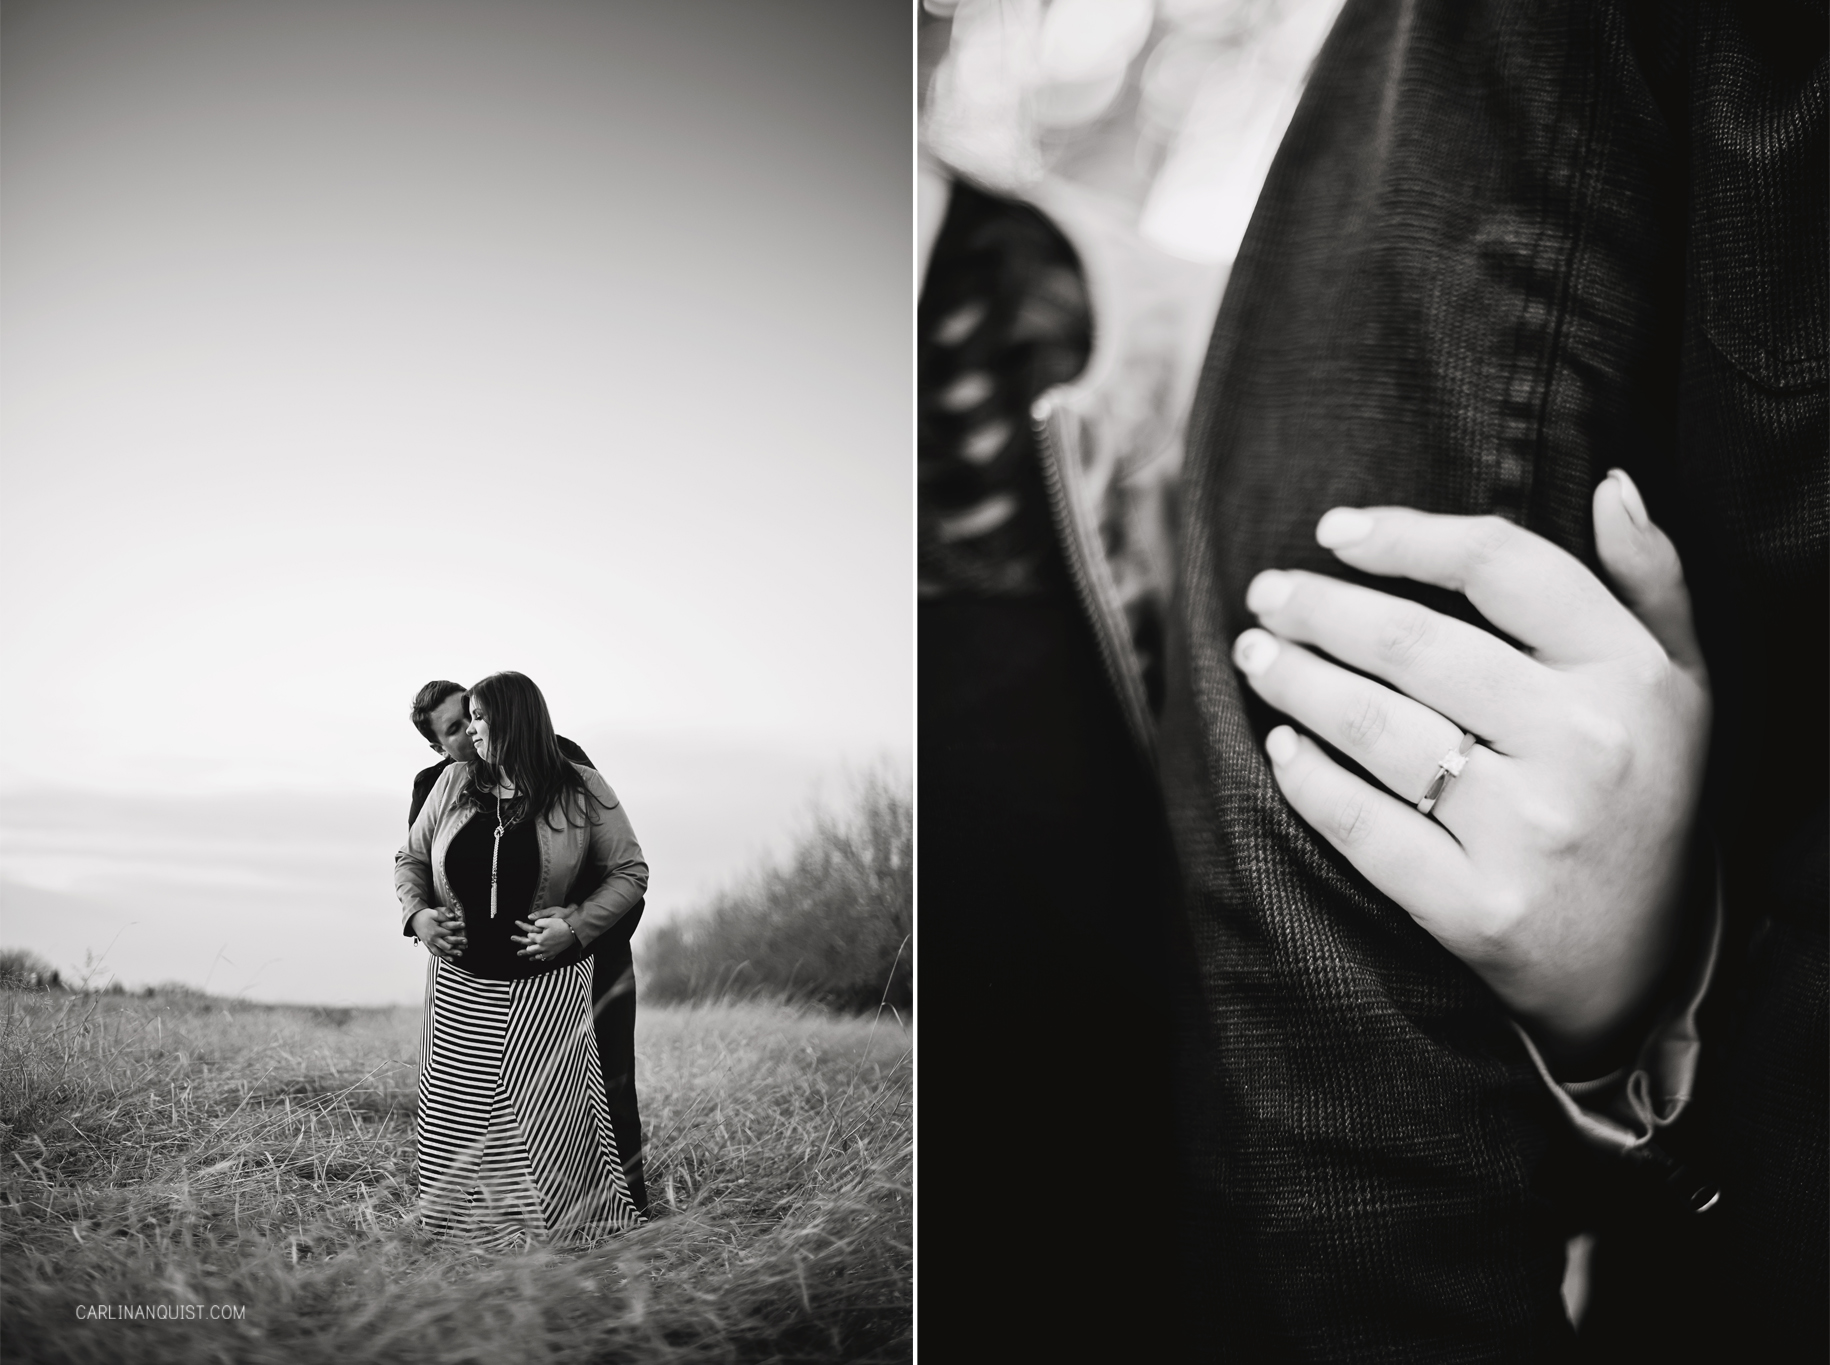 Sunset Engagement Session | Engagement Ring | Calgary Wedding Photographers | Carlin Anquist Photography